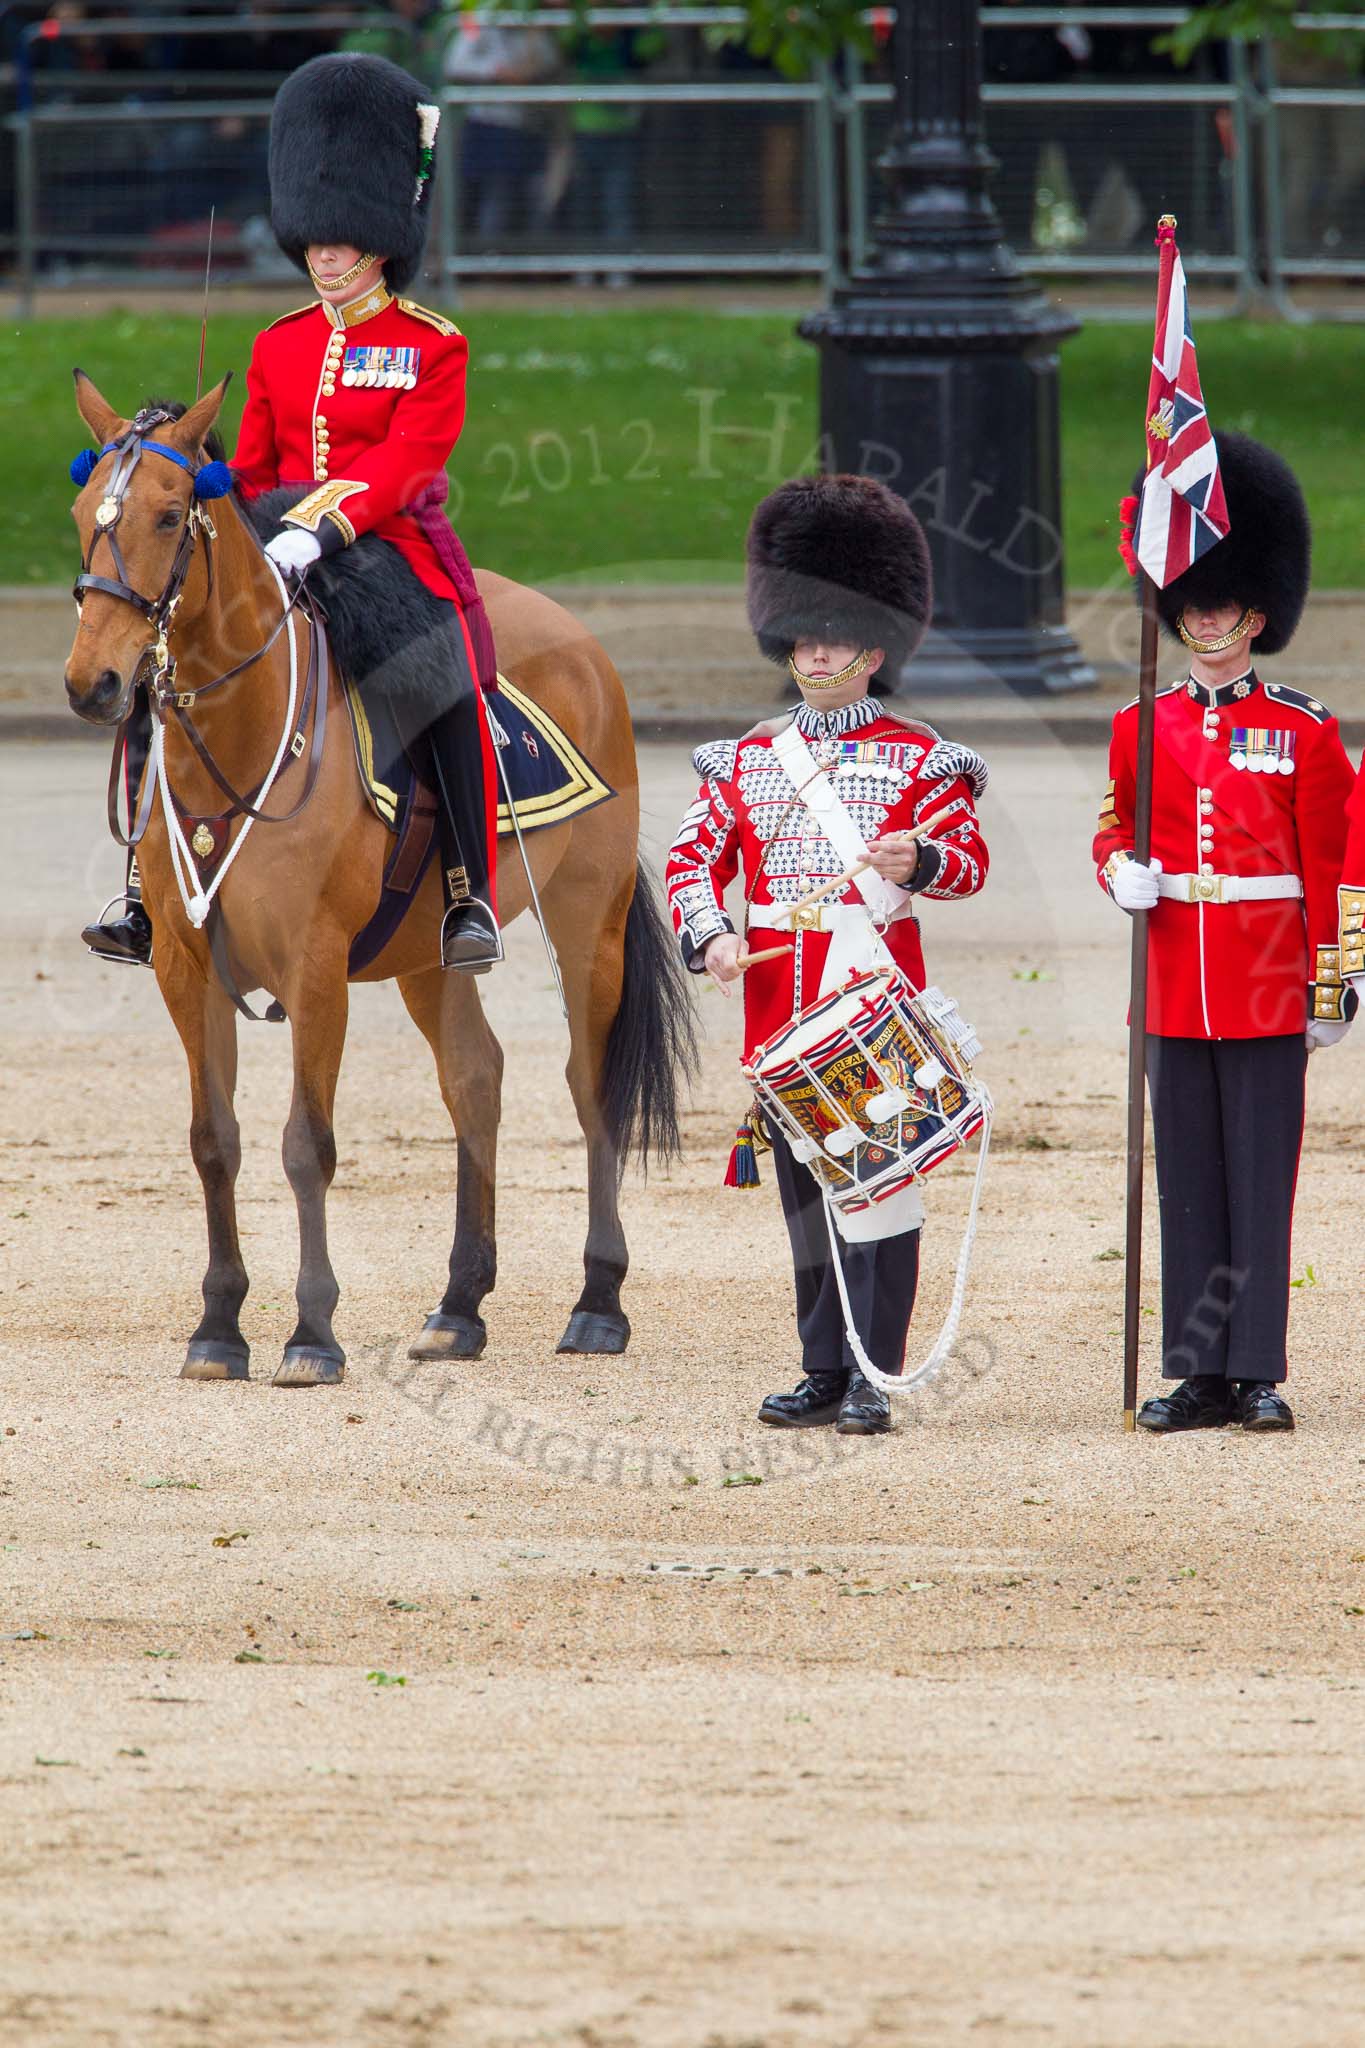 The Colonel's Review 2012: The Major of the Parade, Major Mark Lewis, Welsh Guards, and the "lone drummer" that is about to start the next phase of the parade..
Horse Guards Parade, Westminster,
London SW1,

United Kingdom,
on 09 June 2012 at 11:12, image #244